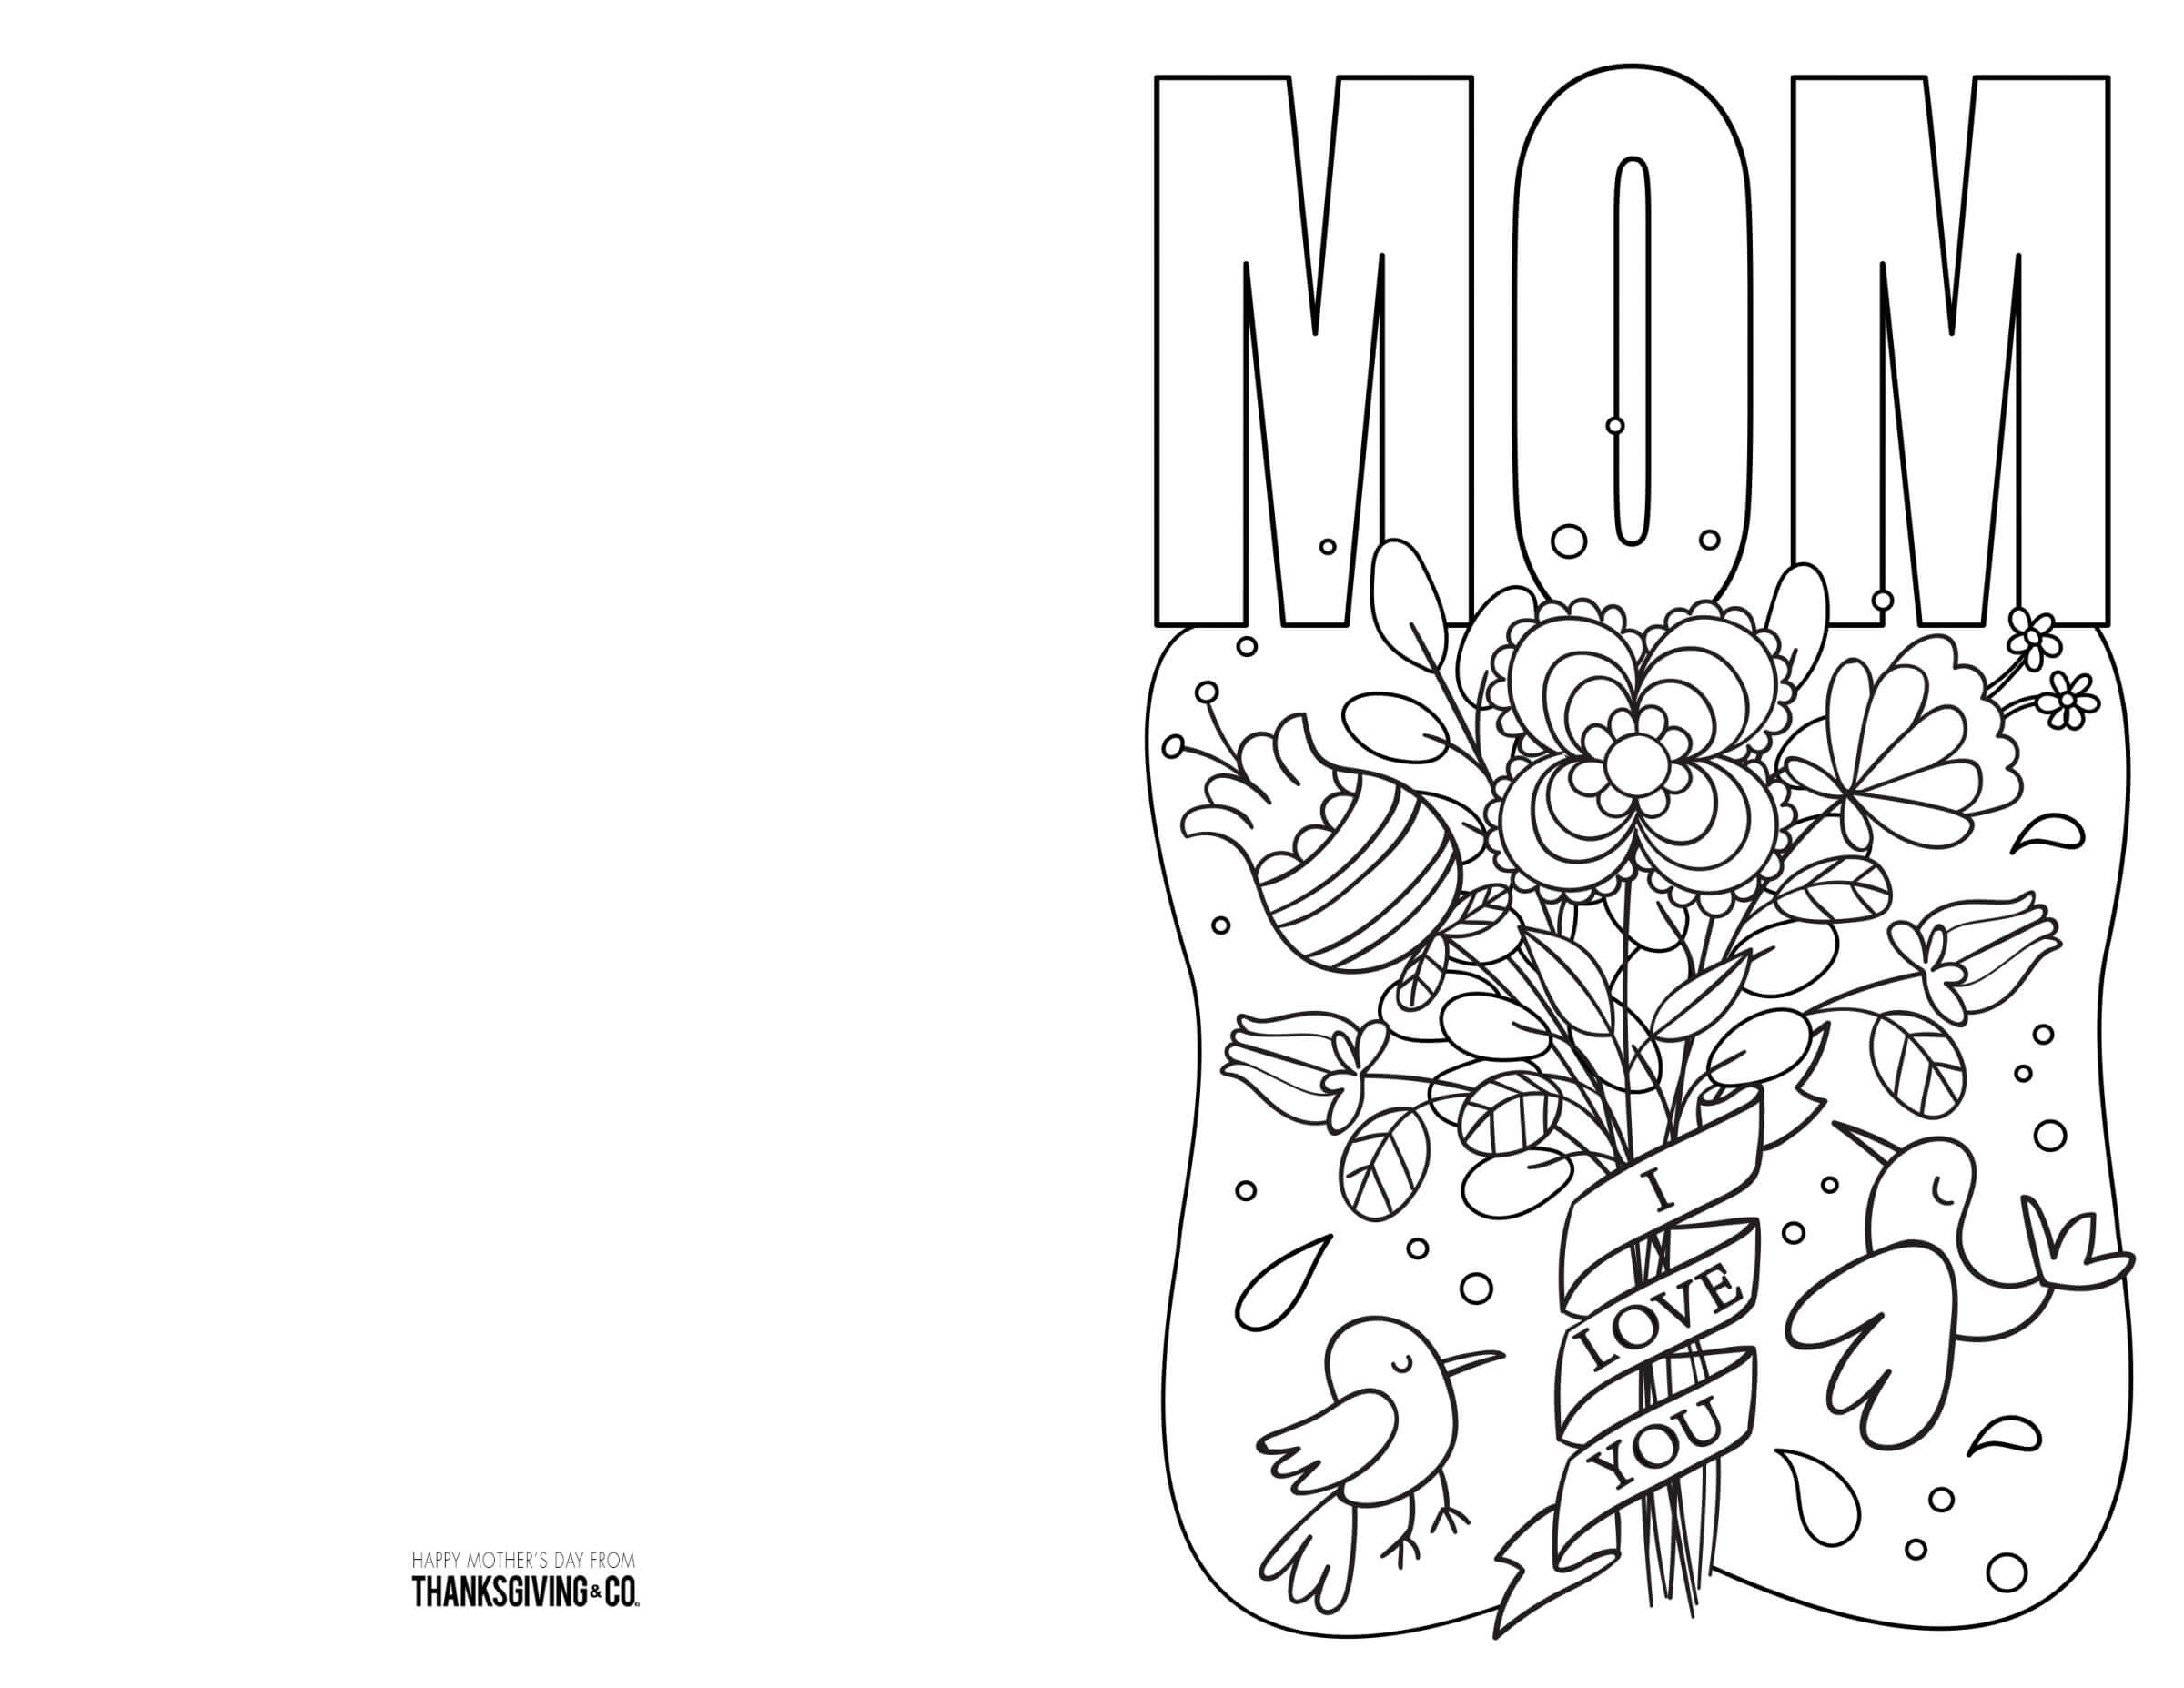 Coloring Pages : Free Printable Mothers Day Ecards To Color Throughout Mothers Day Card Templates